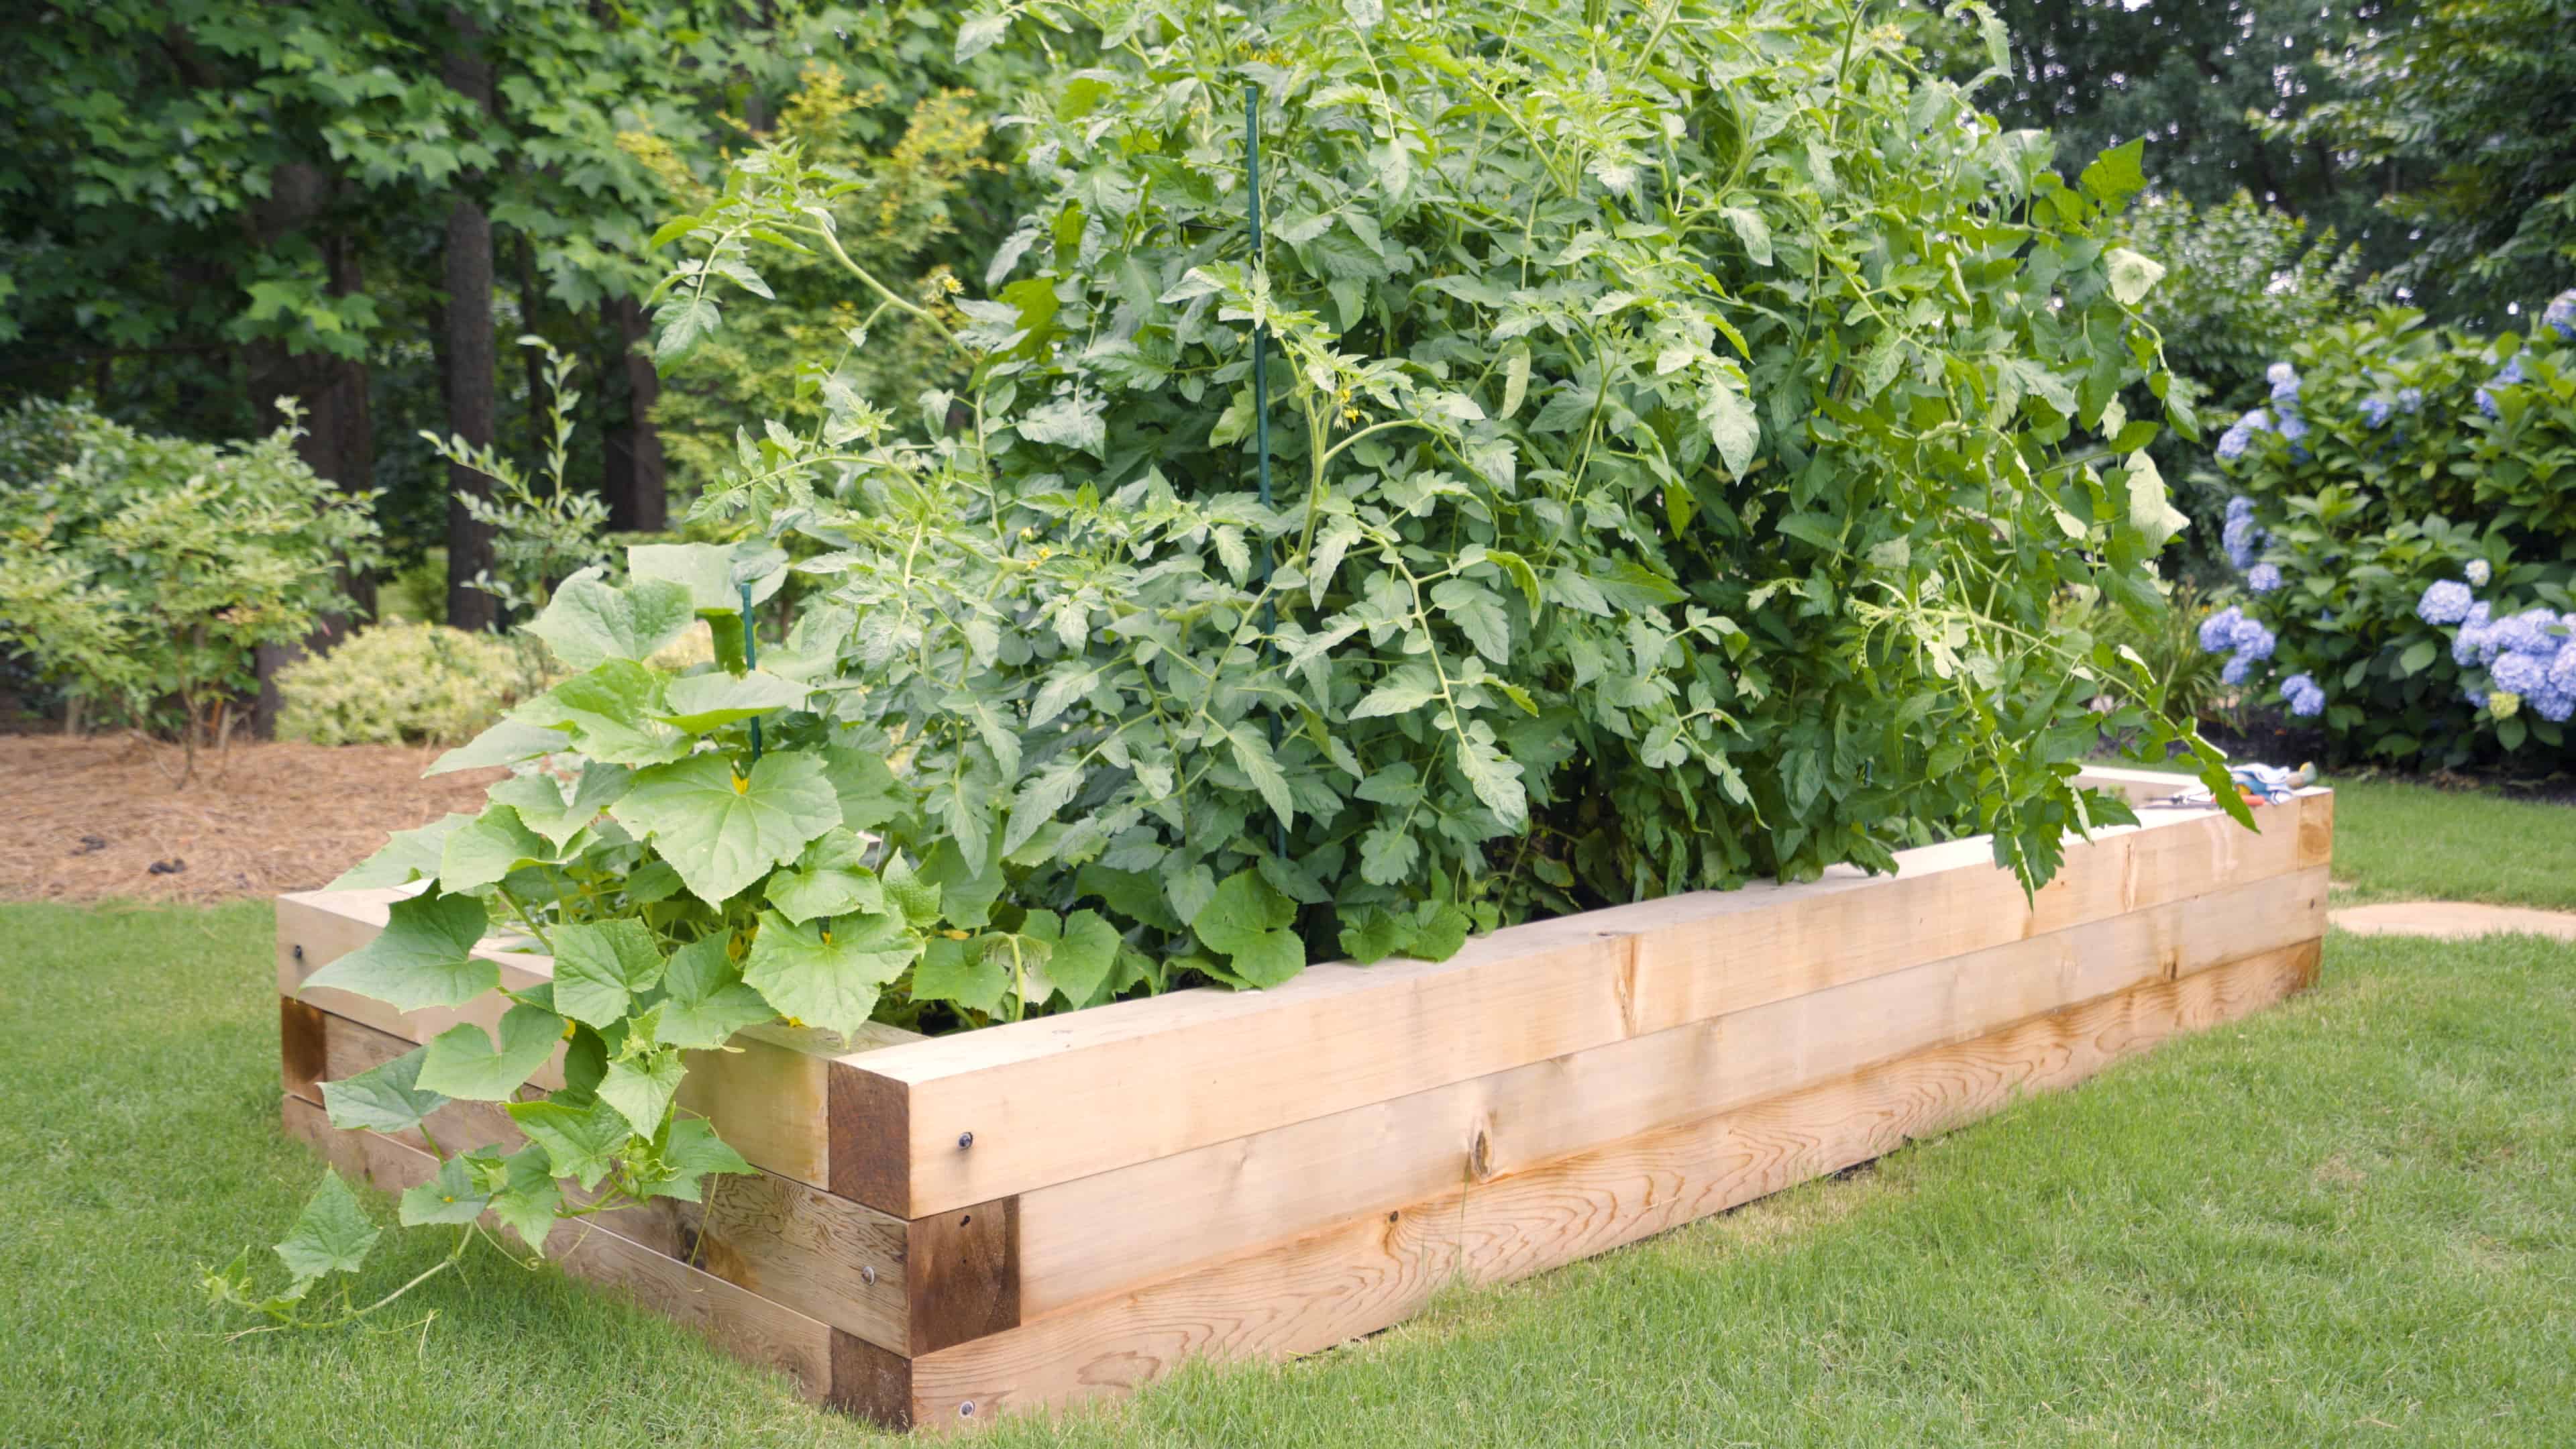 Raised beds are a great way to grow vegetables